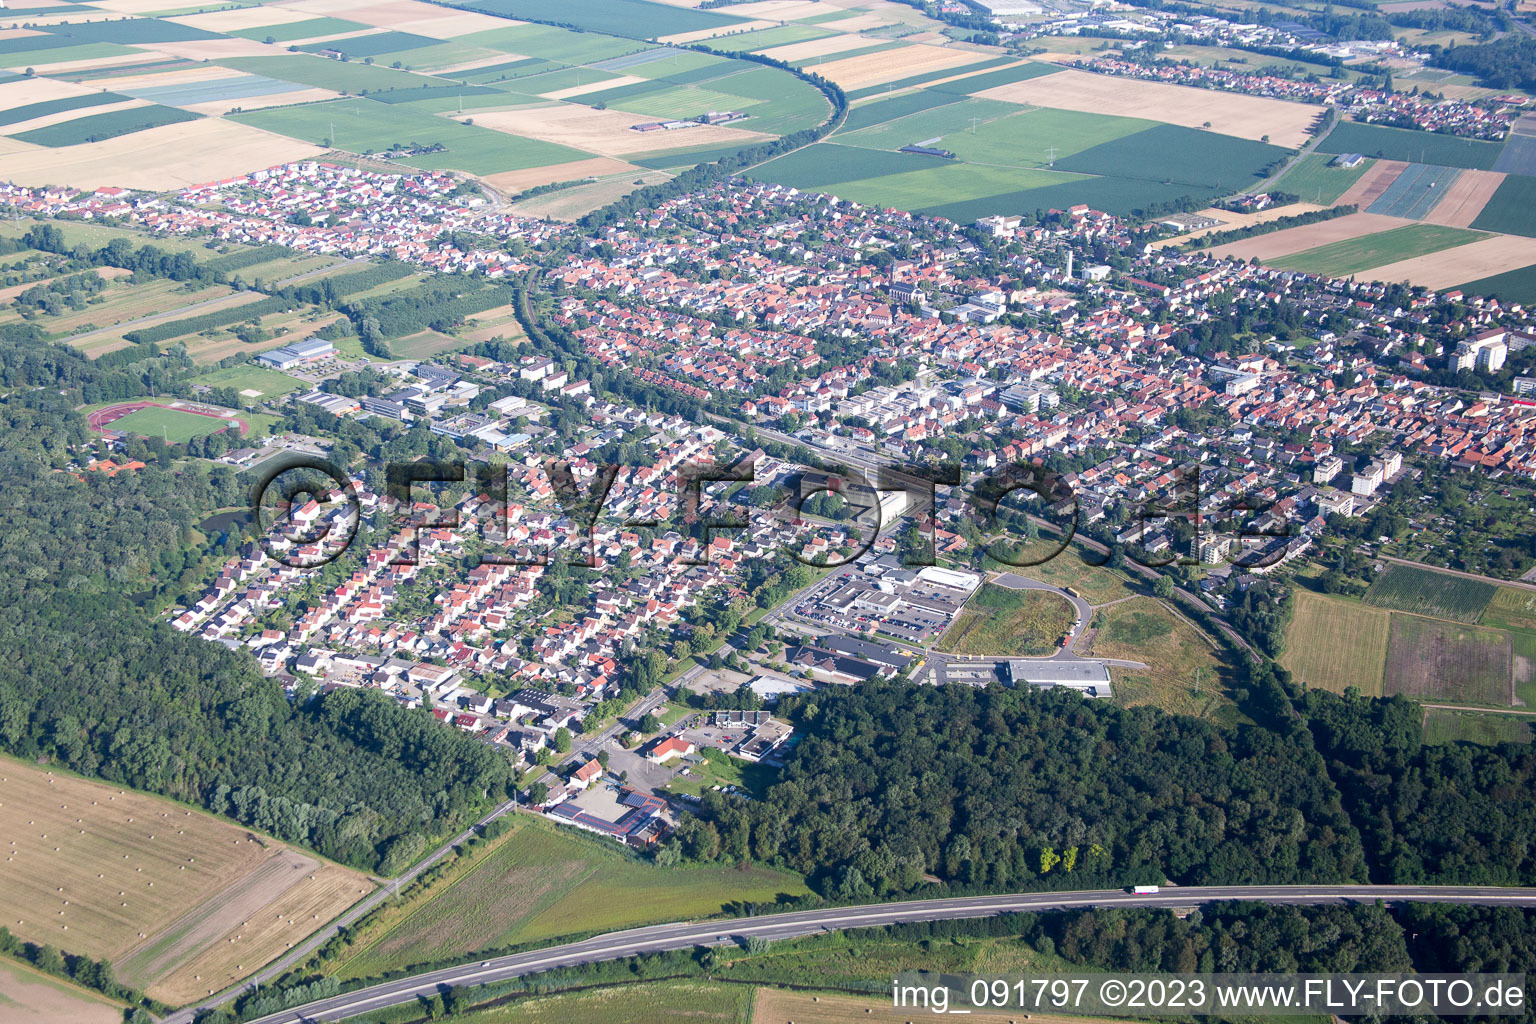 Drone image of Kandel in the state Rhineland-Palatinate, Germany